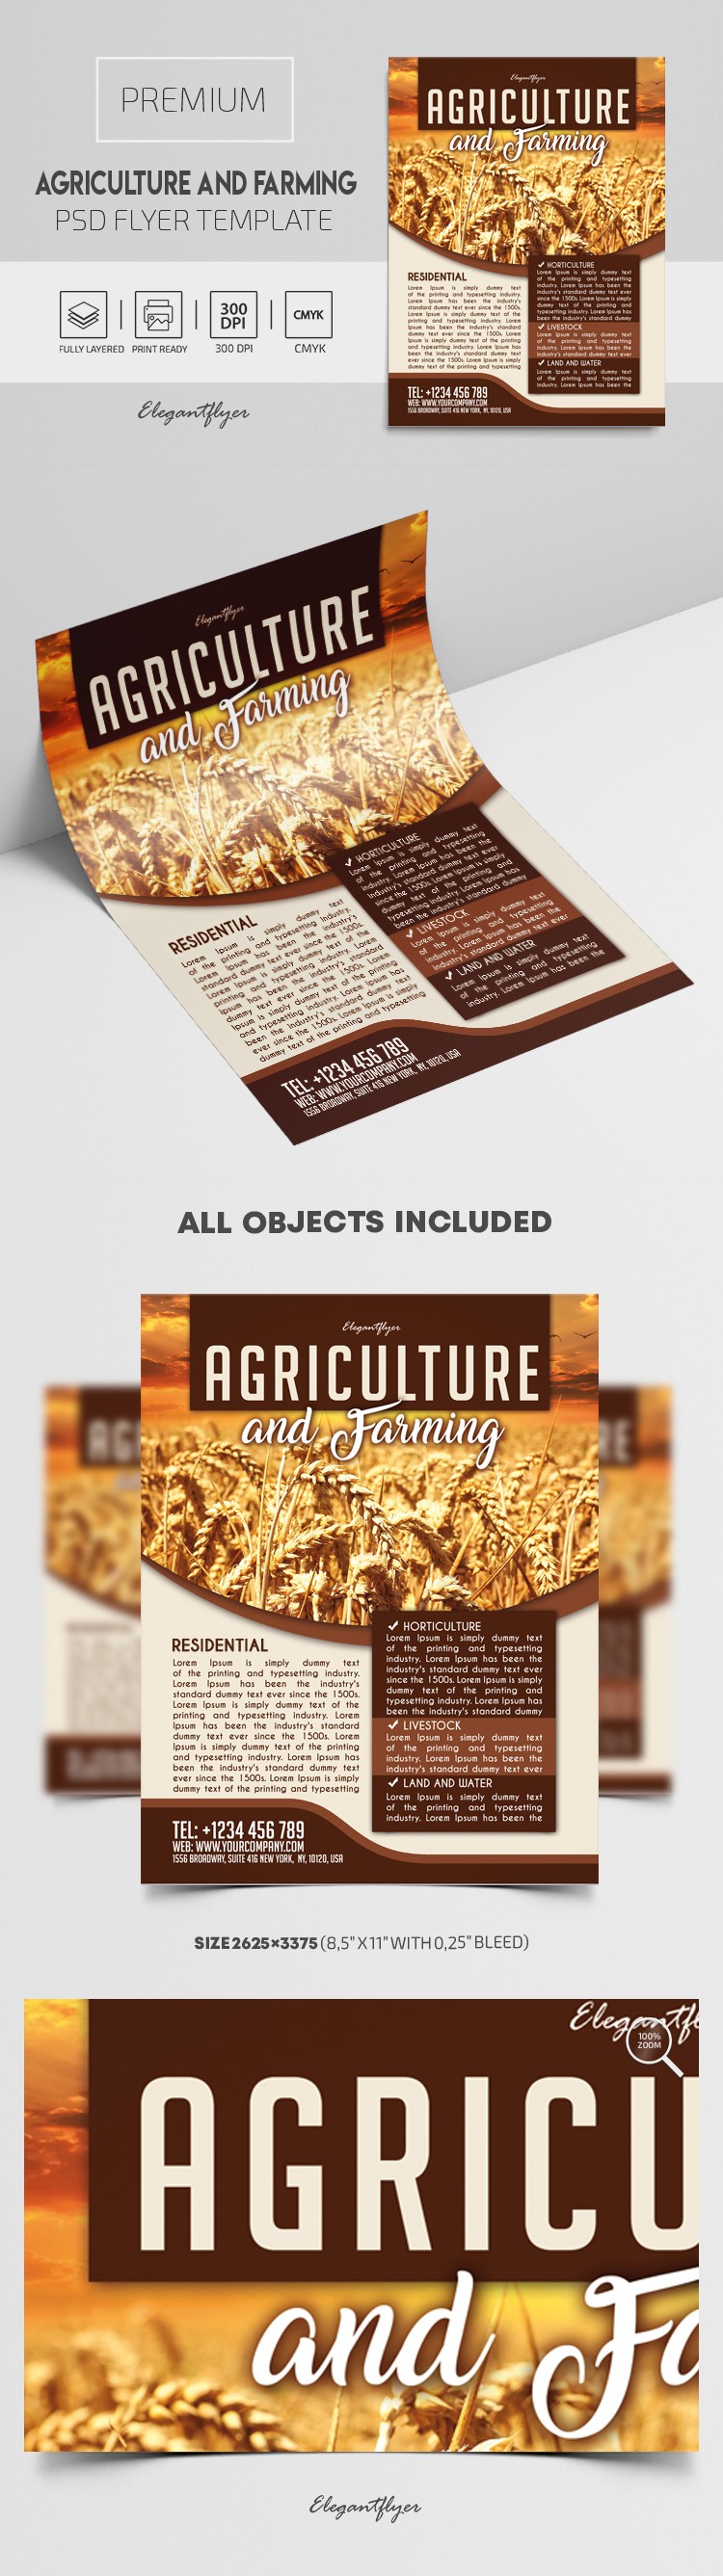 Agriculture and Farming Flyer by ElegantFlyer